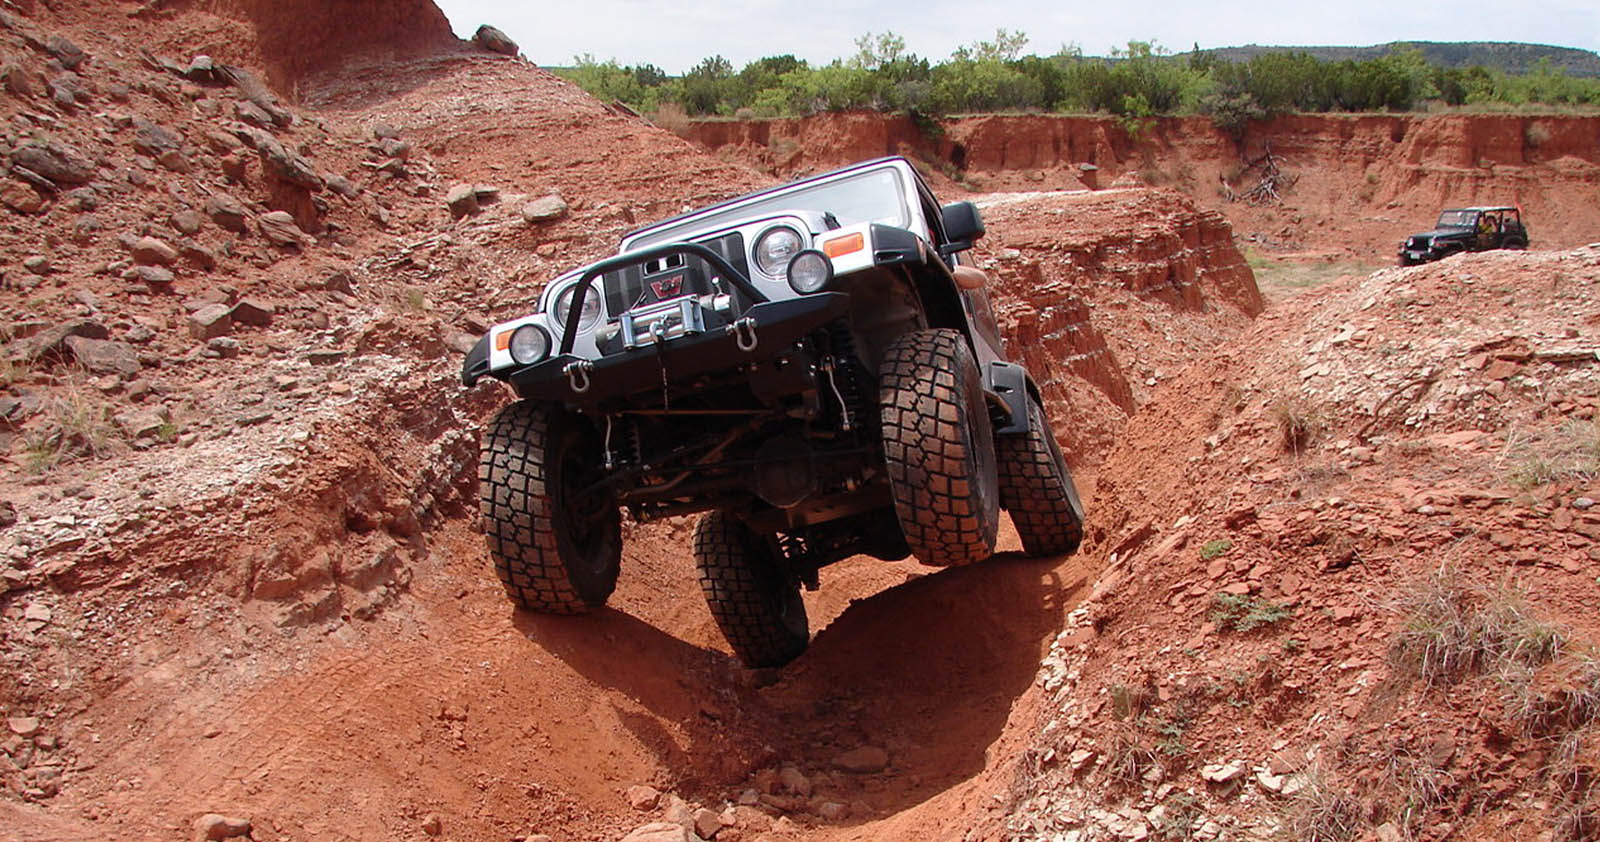 Jeep rock crawling outdoors